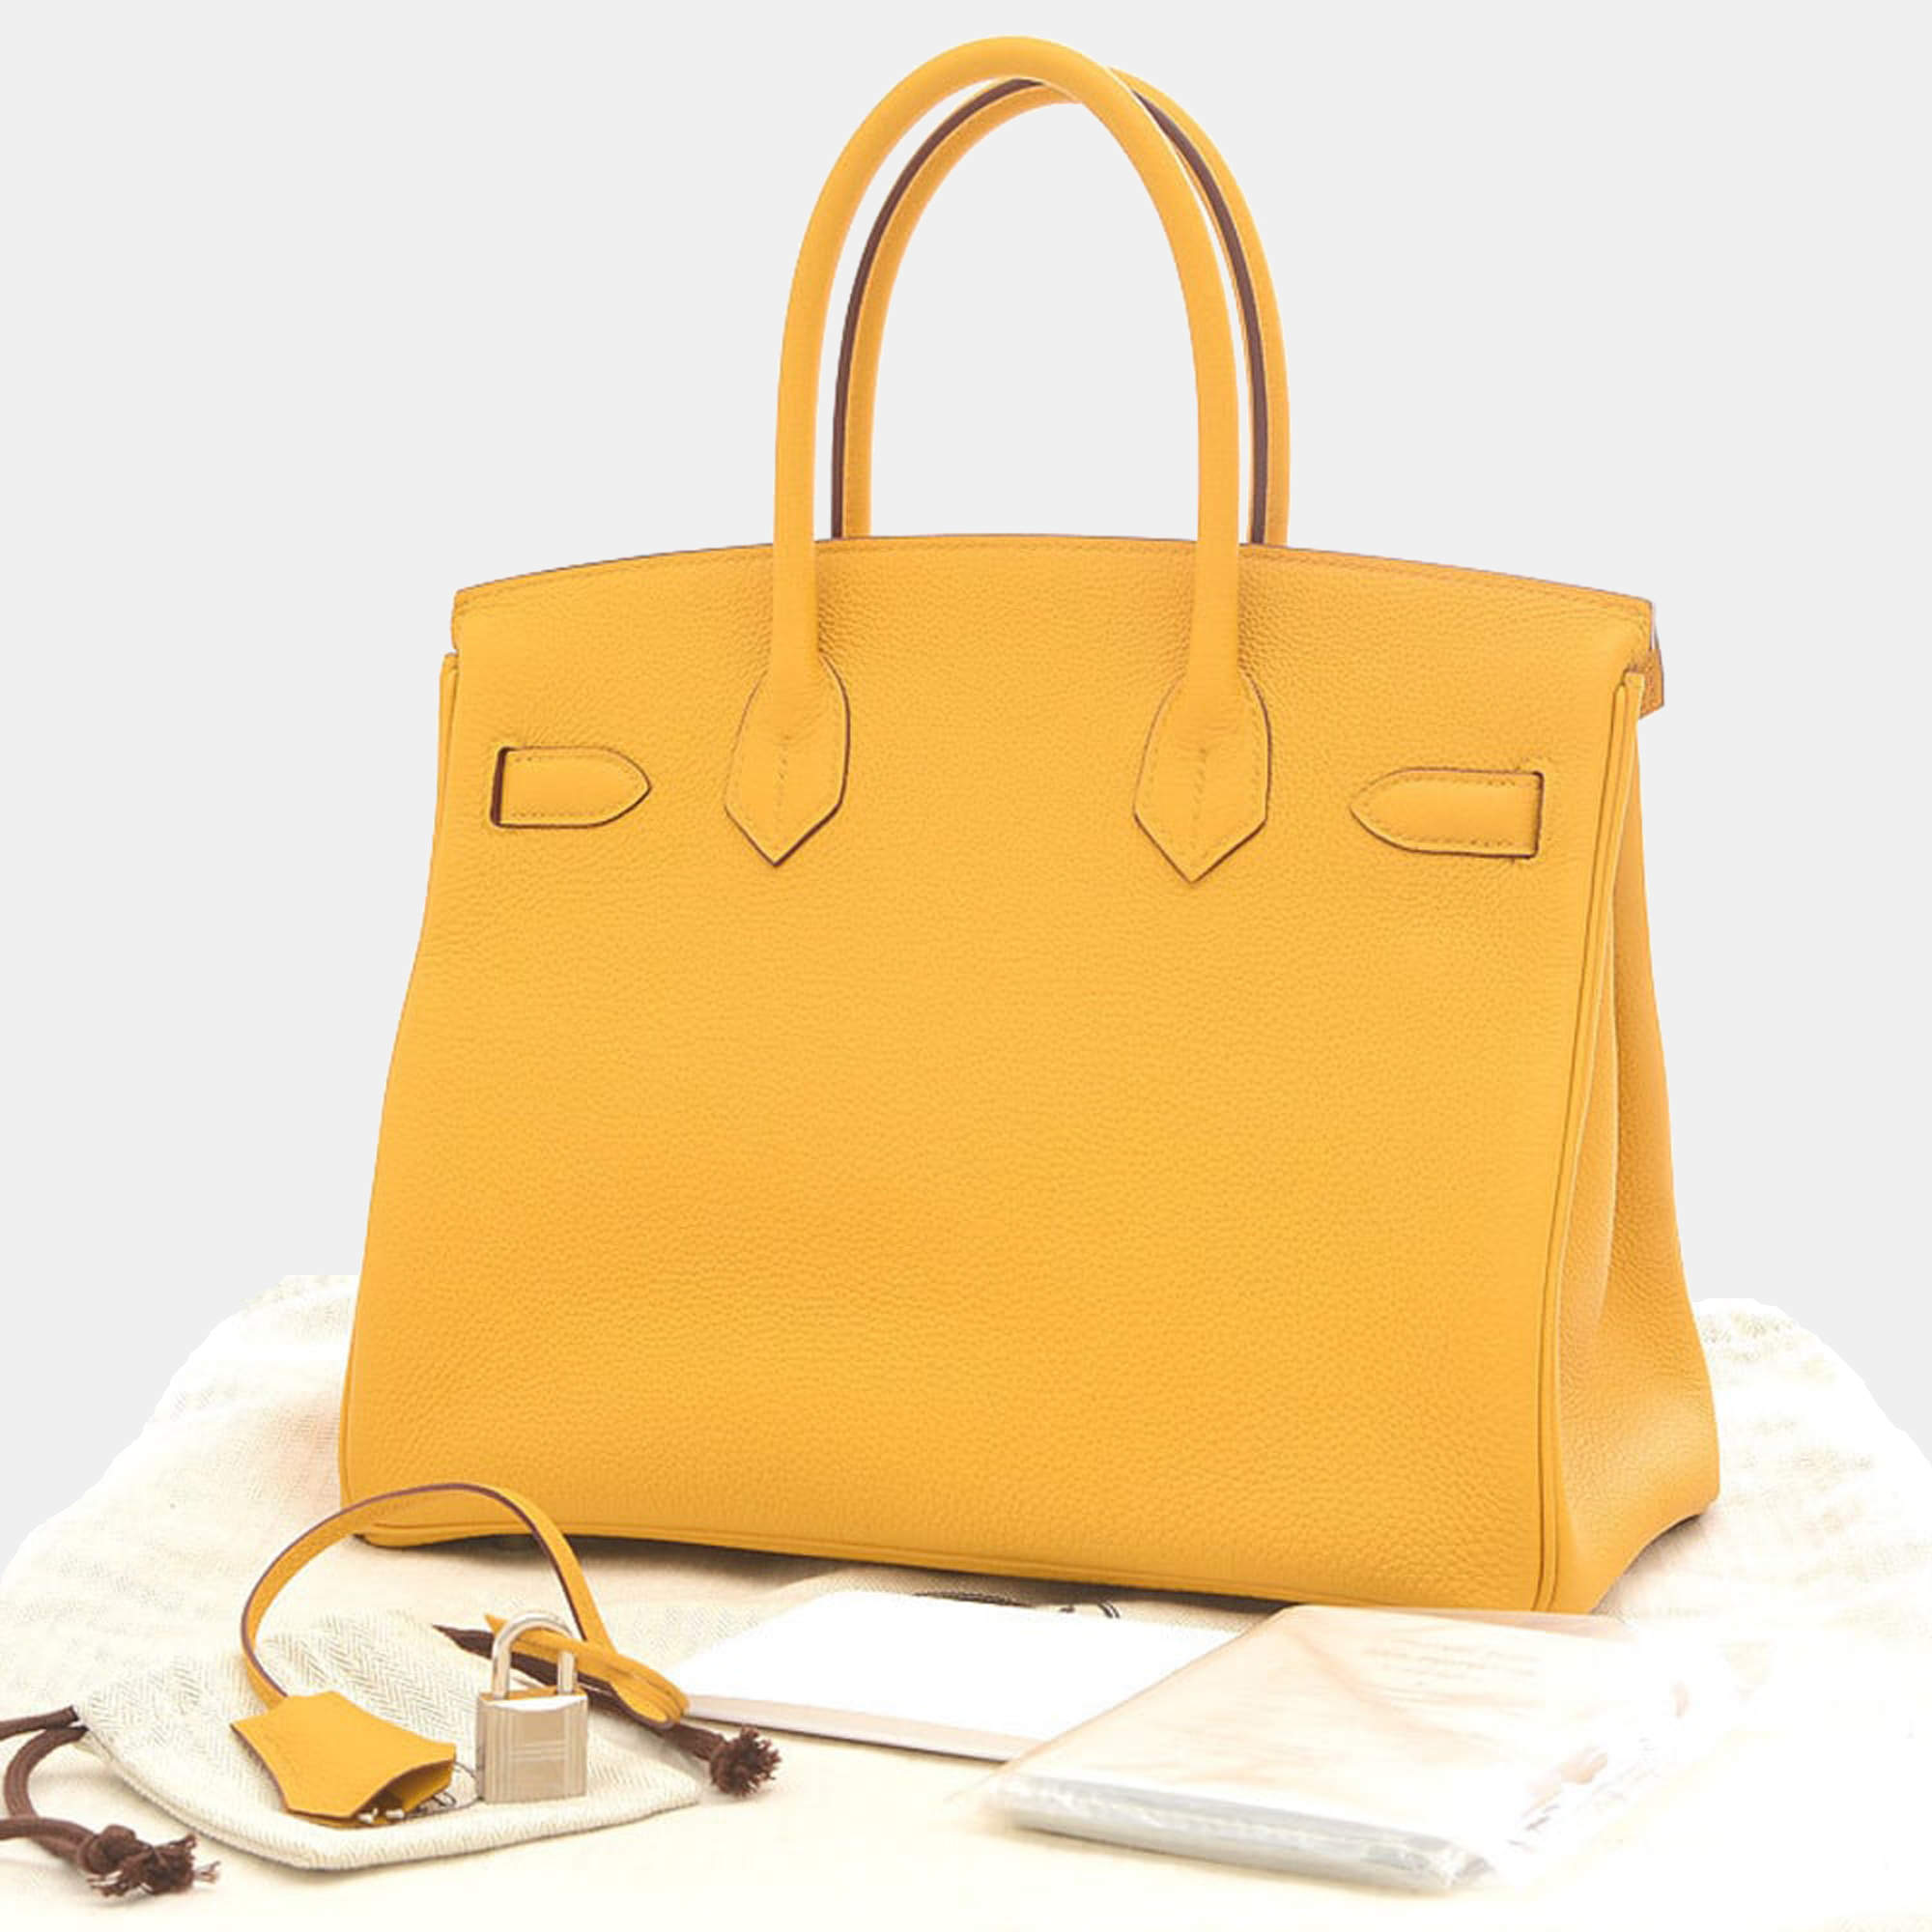 SOLD OUT - Hermes Birkin 30 in Togo This item is only available at